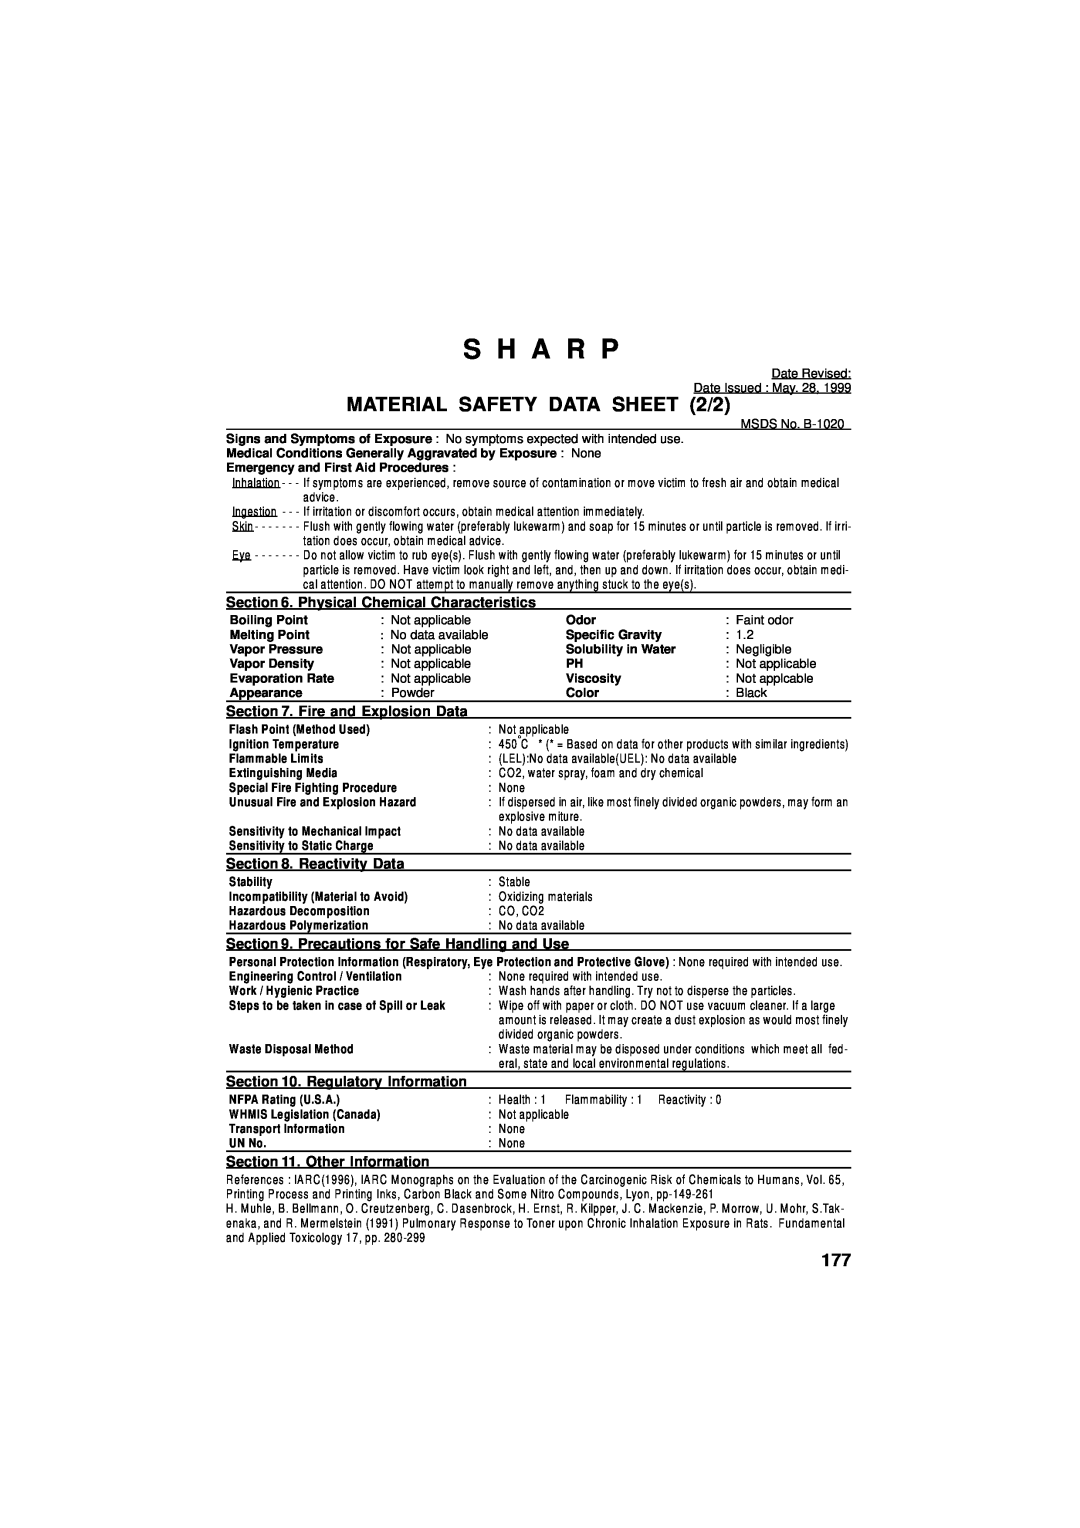 Sharp FO-5550 MATERIAL SAFETY DATA SHEET 2/2, S H A R P, Physical Chemical Characteristics, Fire and Explosion Data 